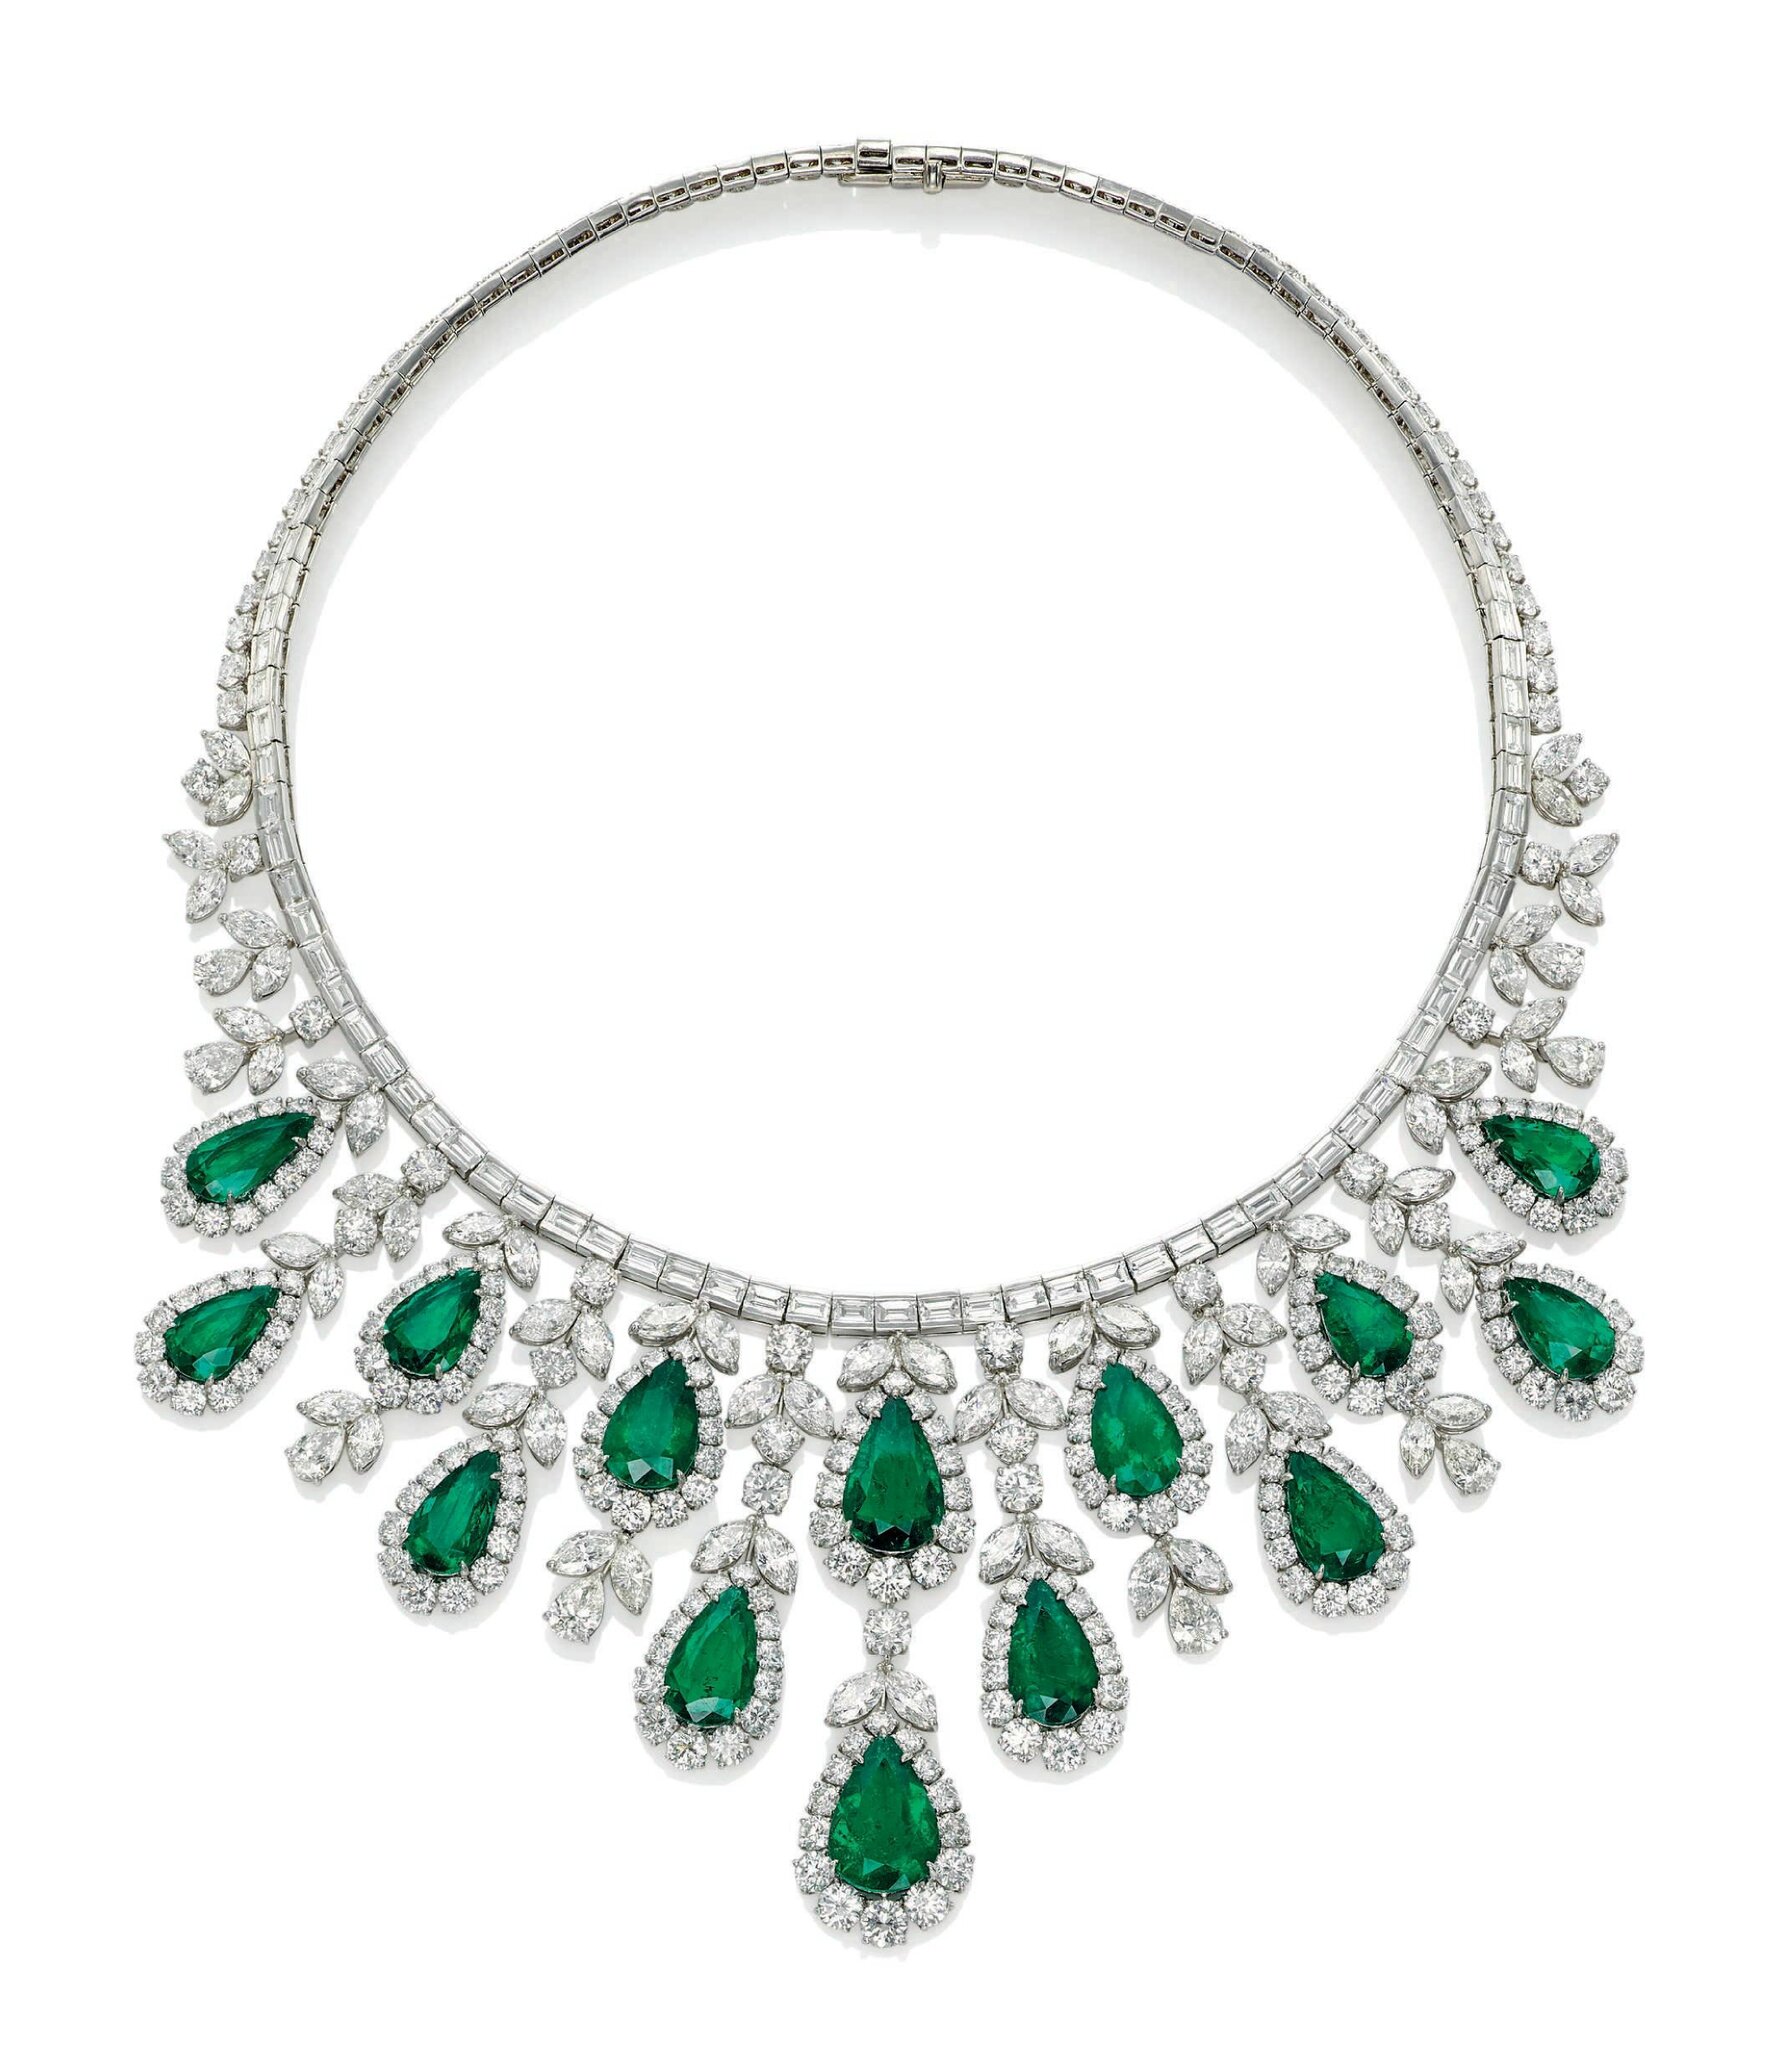 An emerald and diamond fringe necklace, by Harry Winston - Alain.R.Truong